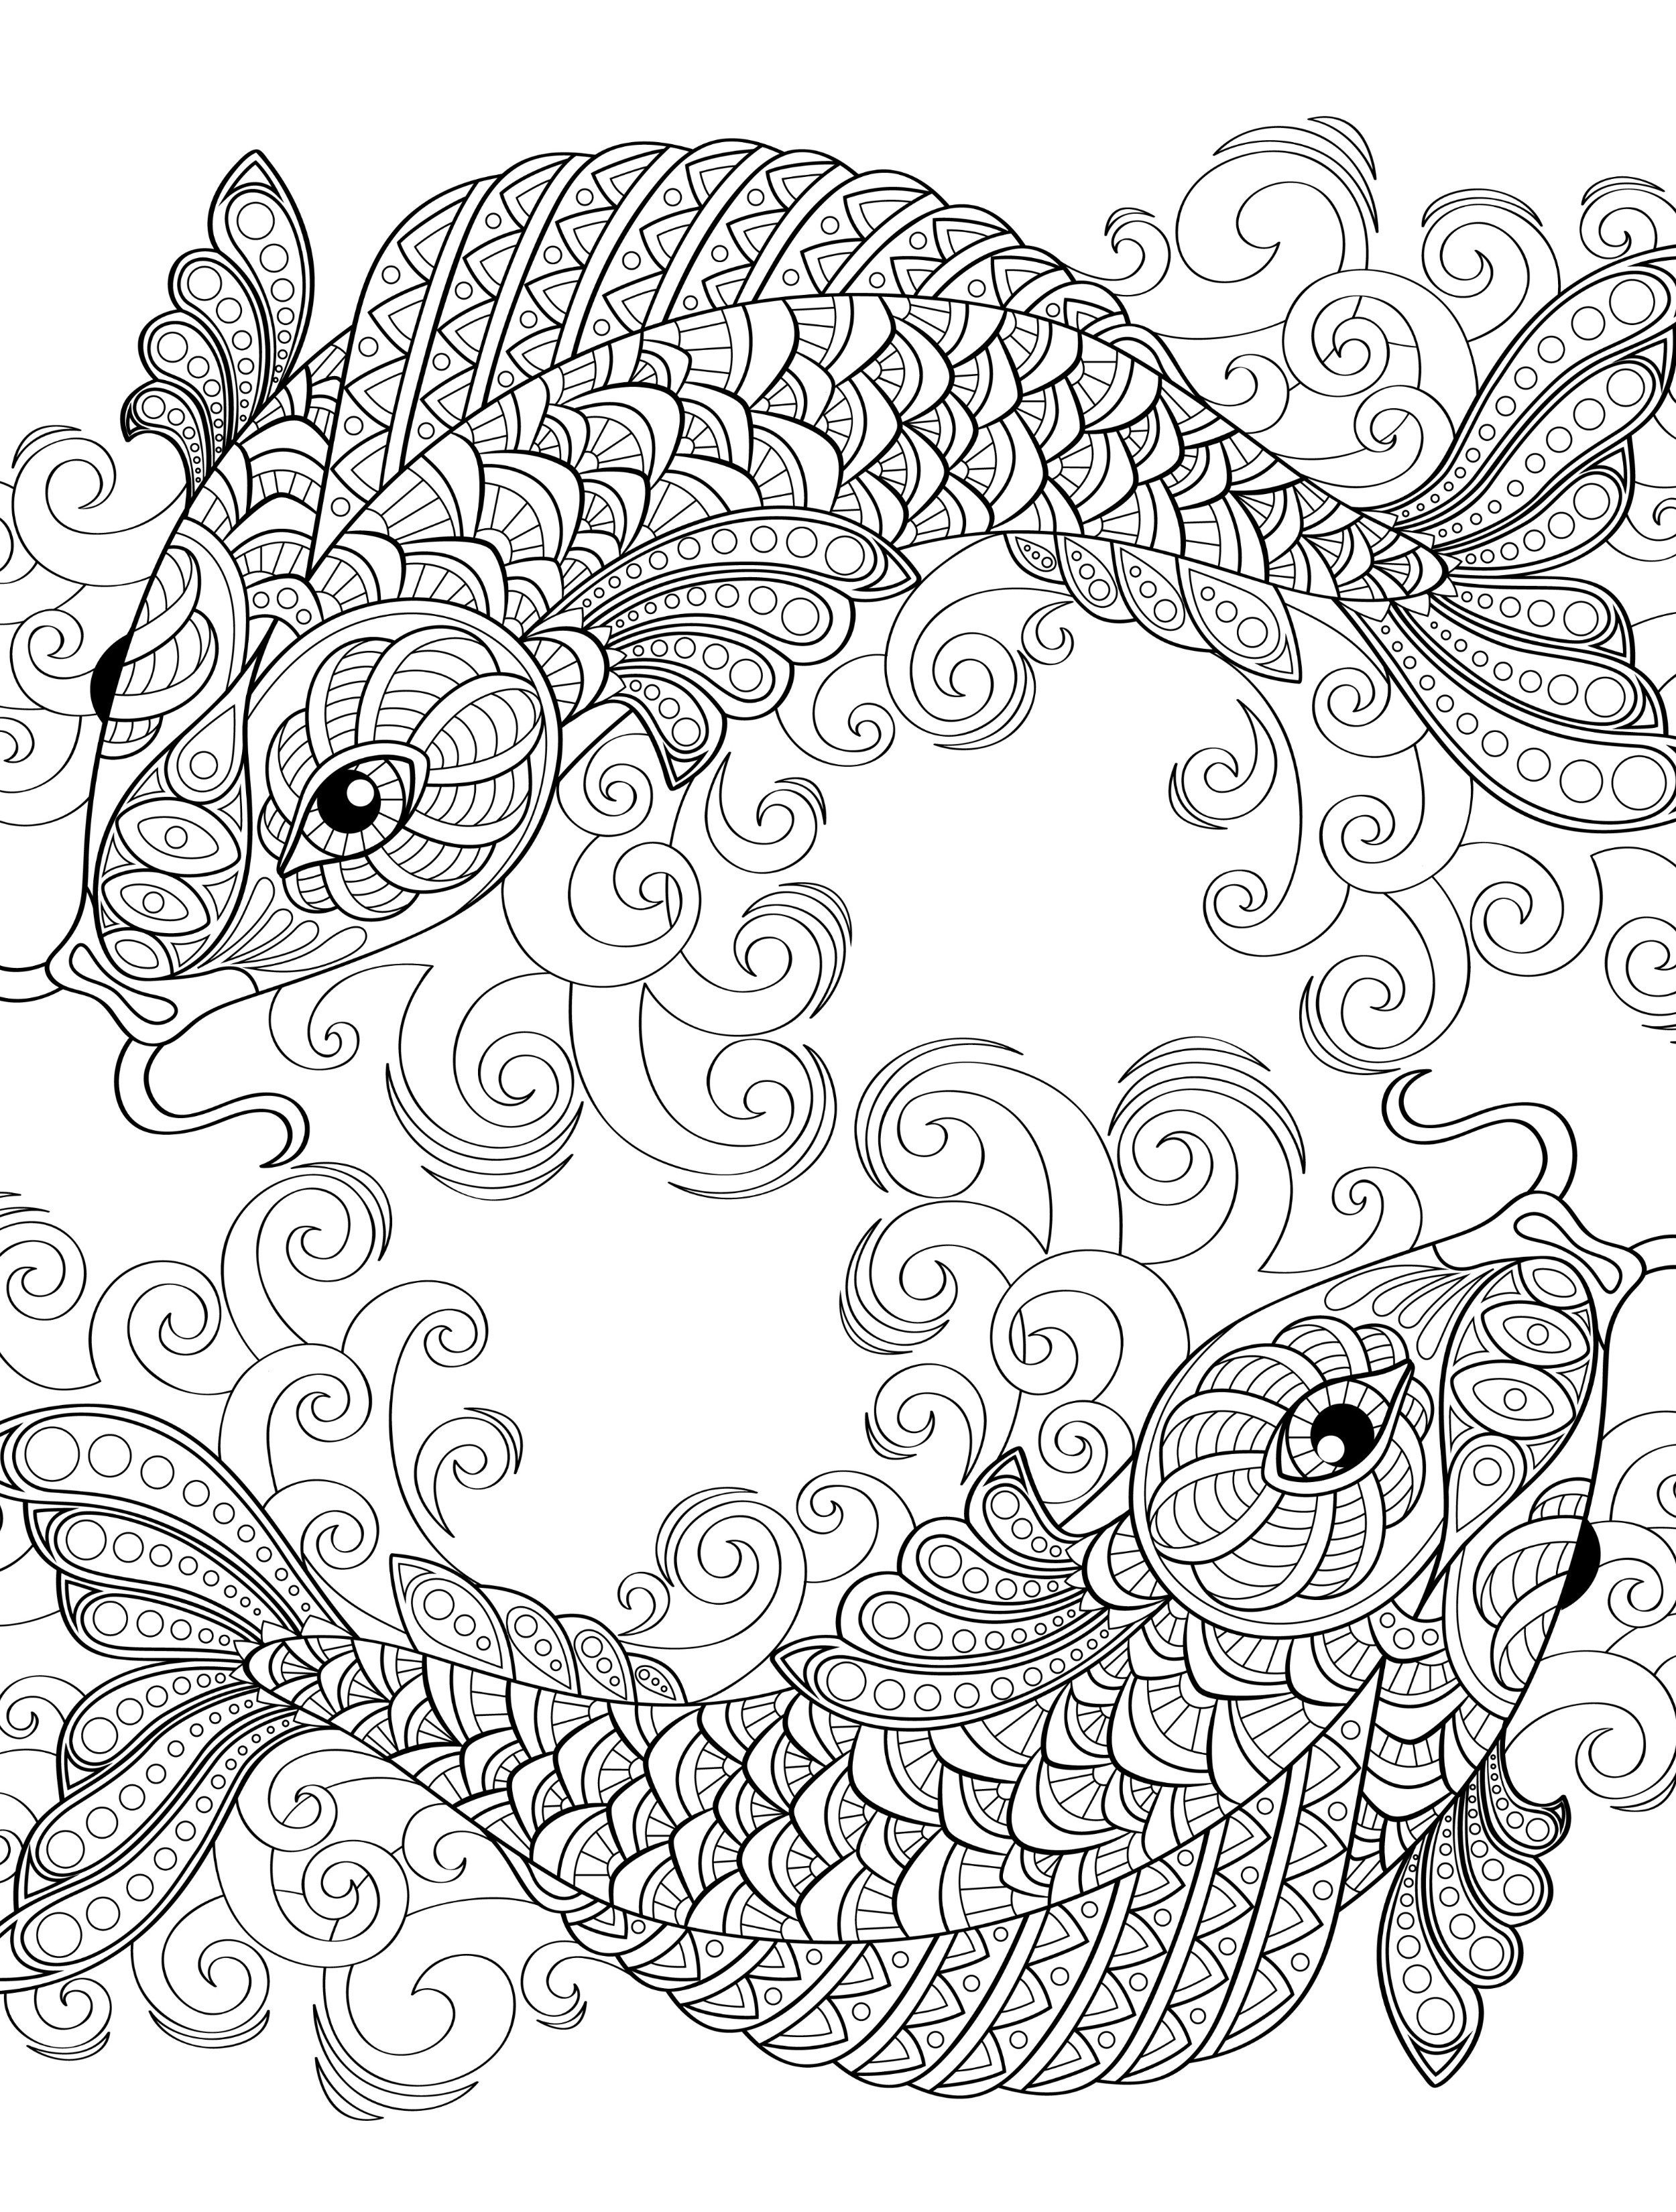 Absurdly whimsical adult coloring pages skull coloring pages mandala coloring pages free adult coloring pages